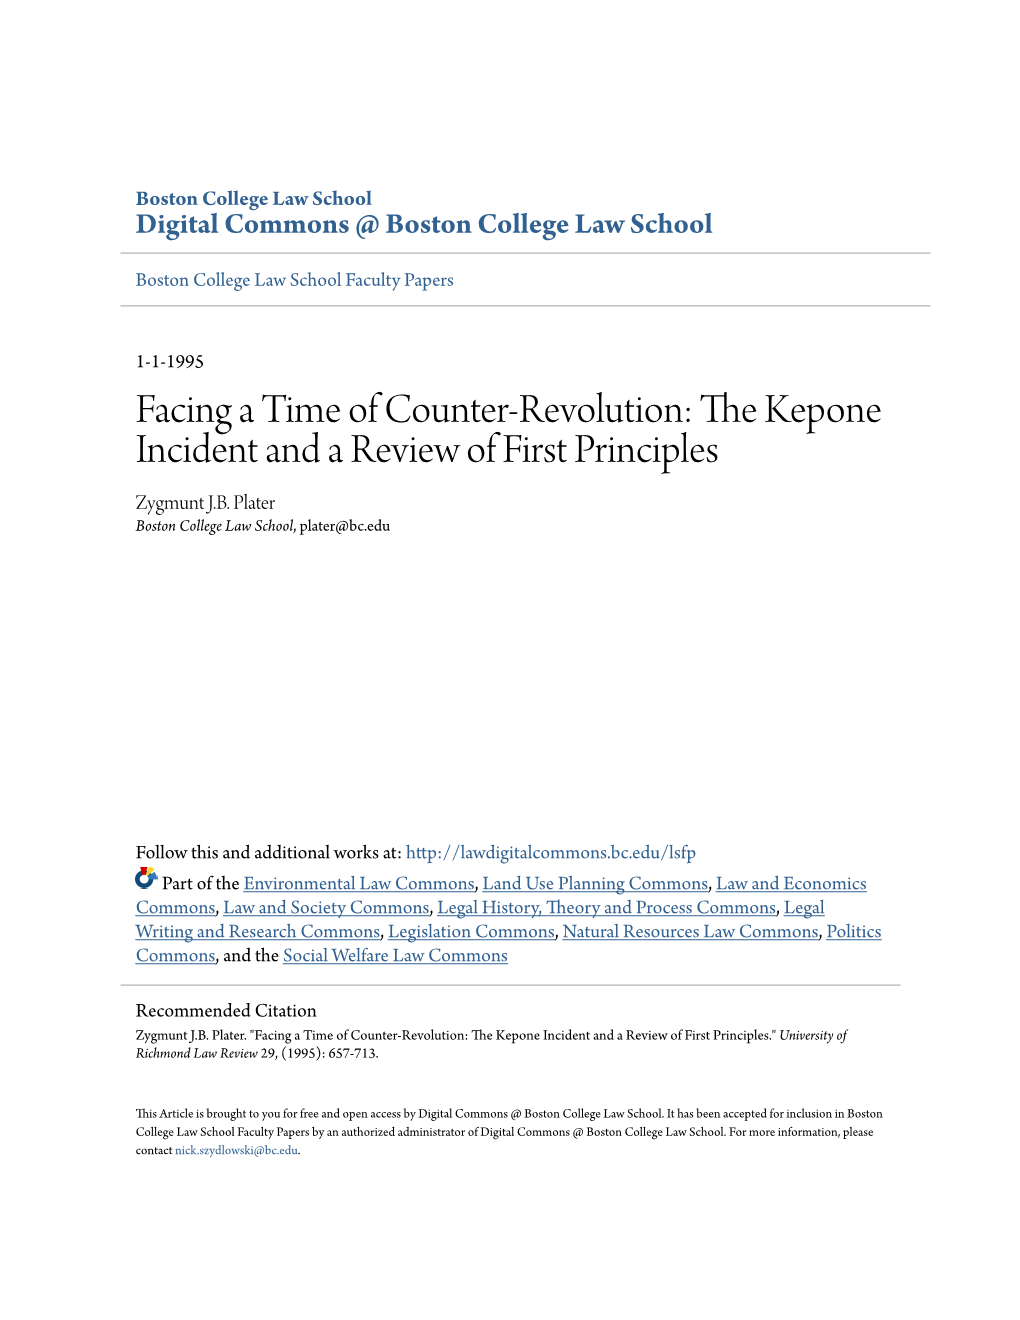 Facing a Time of Counter-Revolution: the Kepone Incident and a Review of First Principles Zygmunt J.B